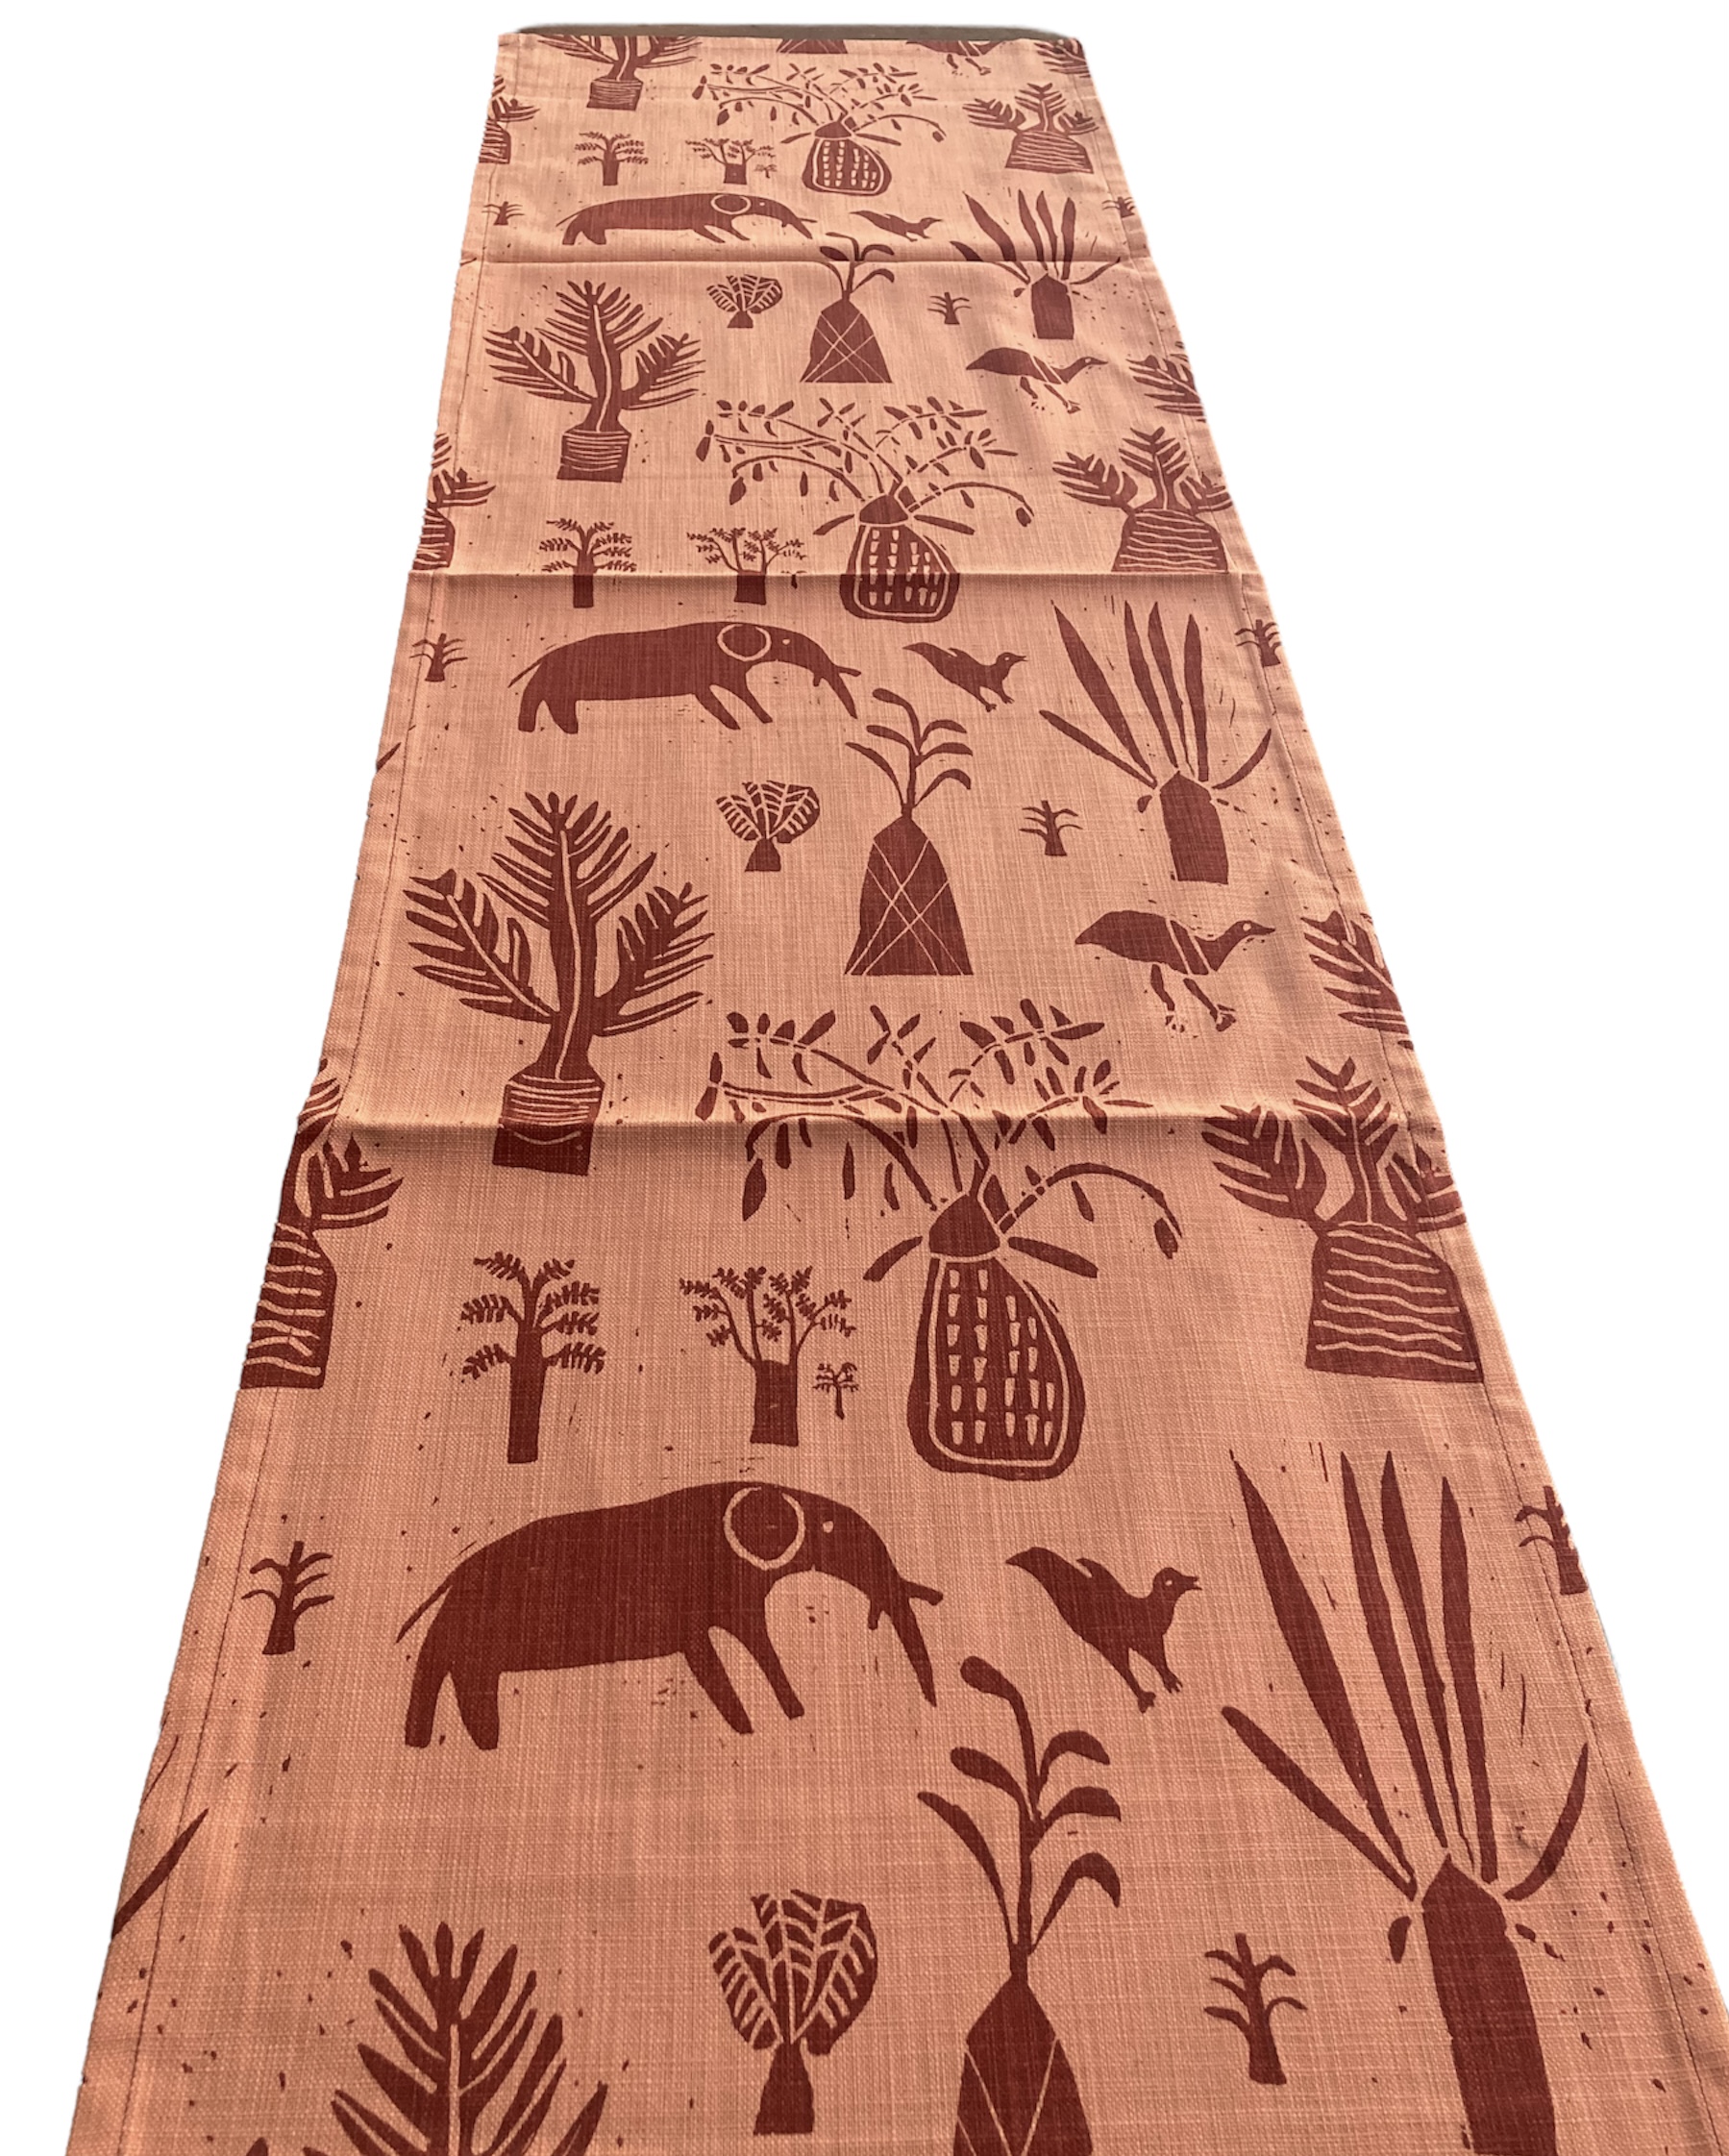 100% cotton Table Runner 58" x 16" from Namibia - Design 09s